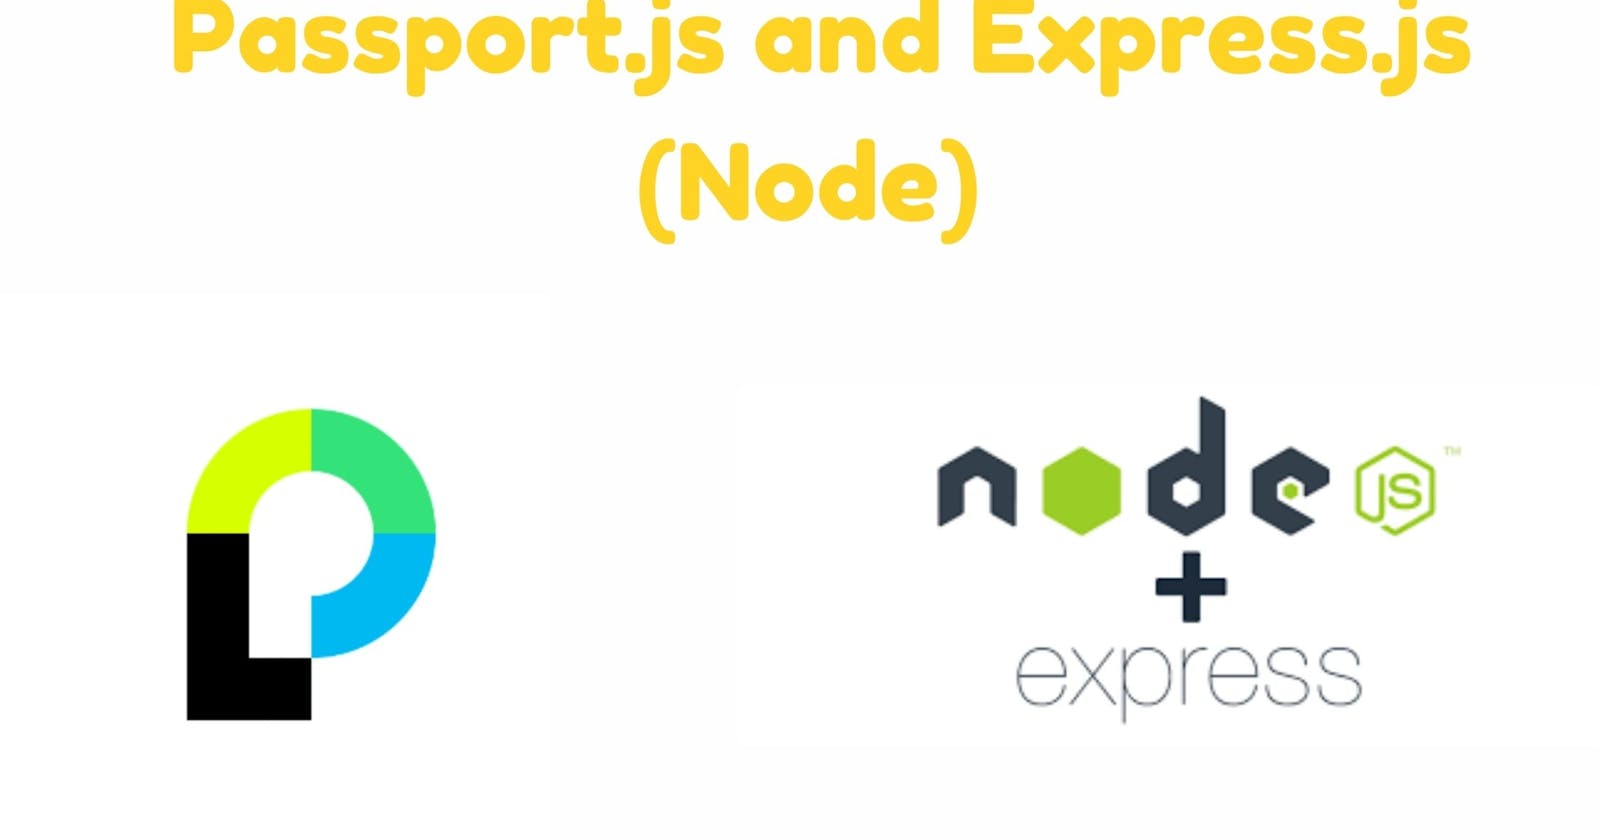 Users Authentication using Passport.js with Node (Express.js)